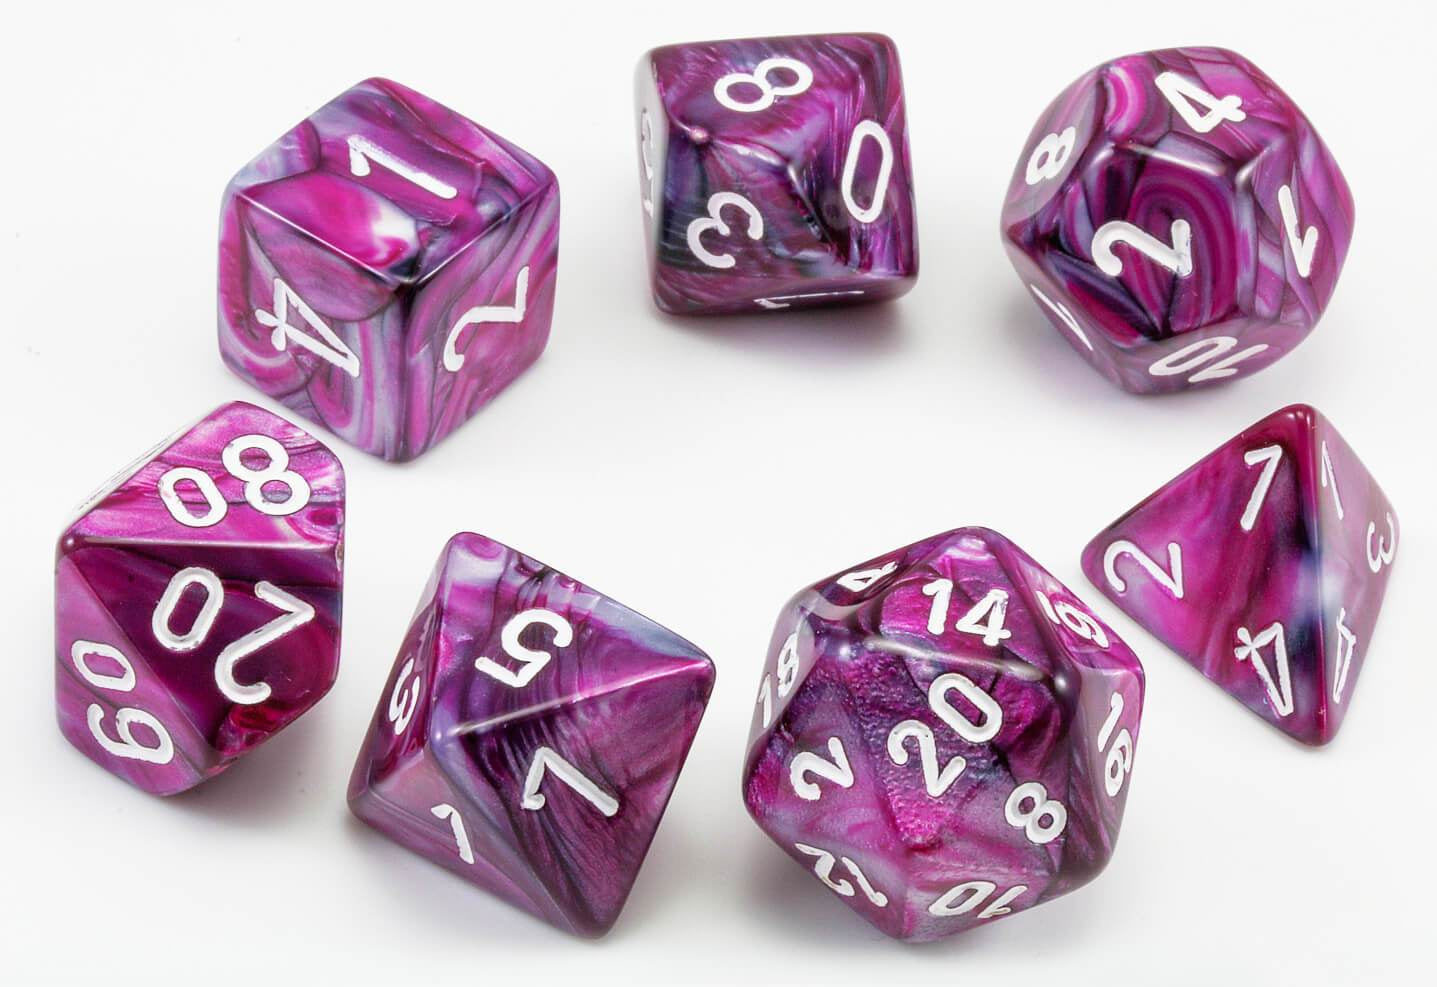 CHESSEX 7 DIE POLYHEDRAL DICE SET: LAB DICE LUSTROUS AMETHYST WITH WHITE